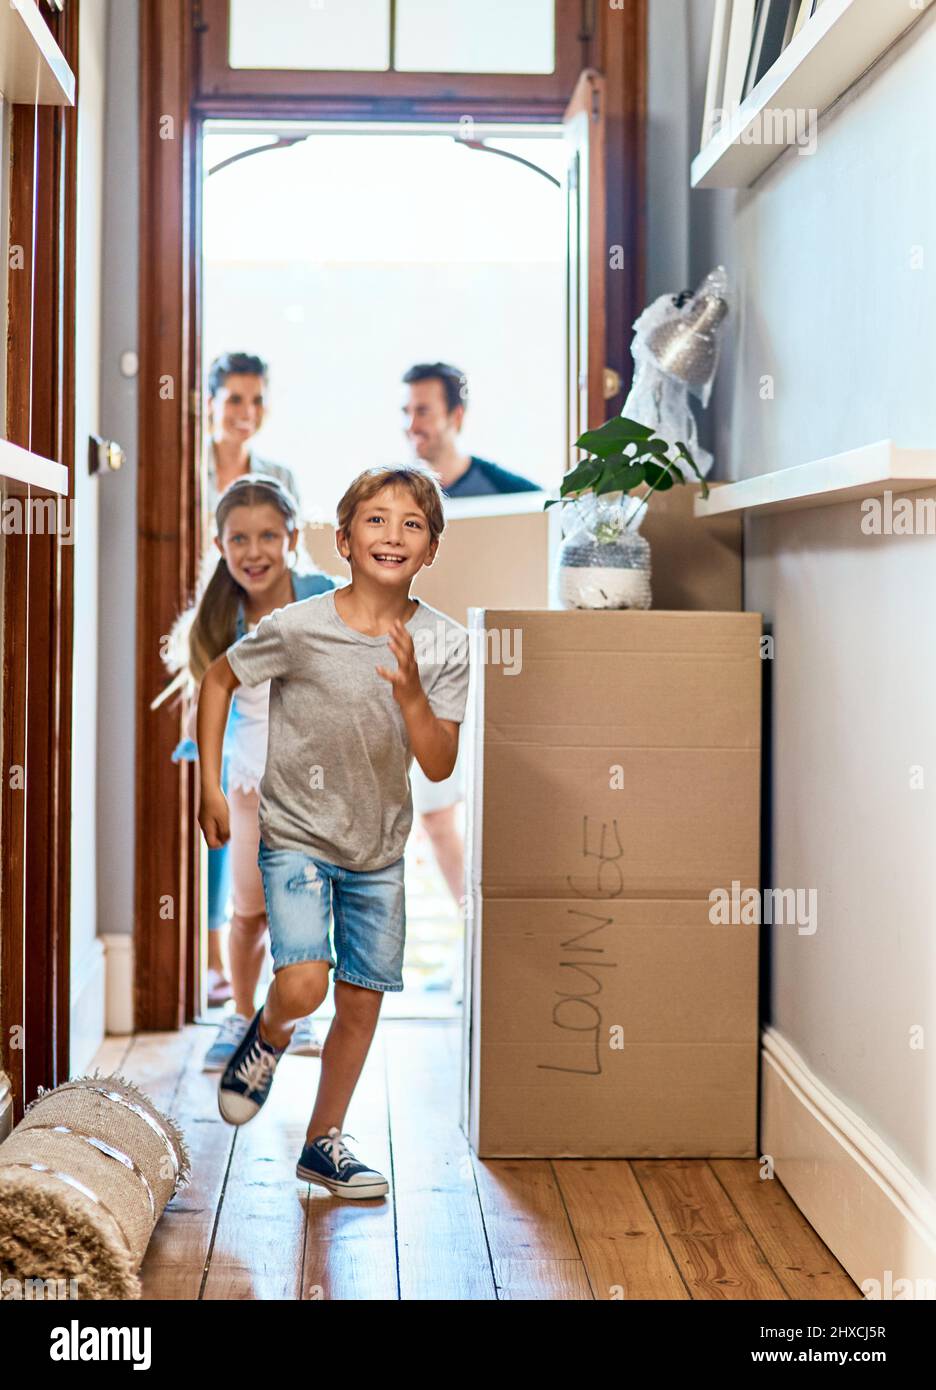 Off to go pick their rooms. Shot of a cheerful young boy and girl running in a hallway in their new home while having fun inside during the day. Stock Photo